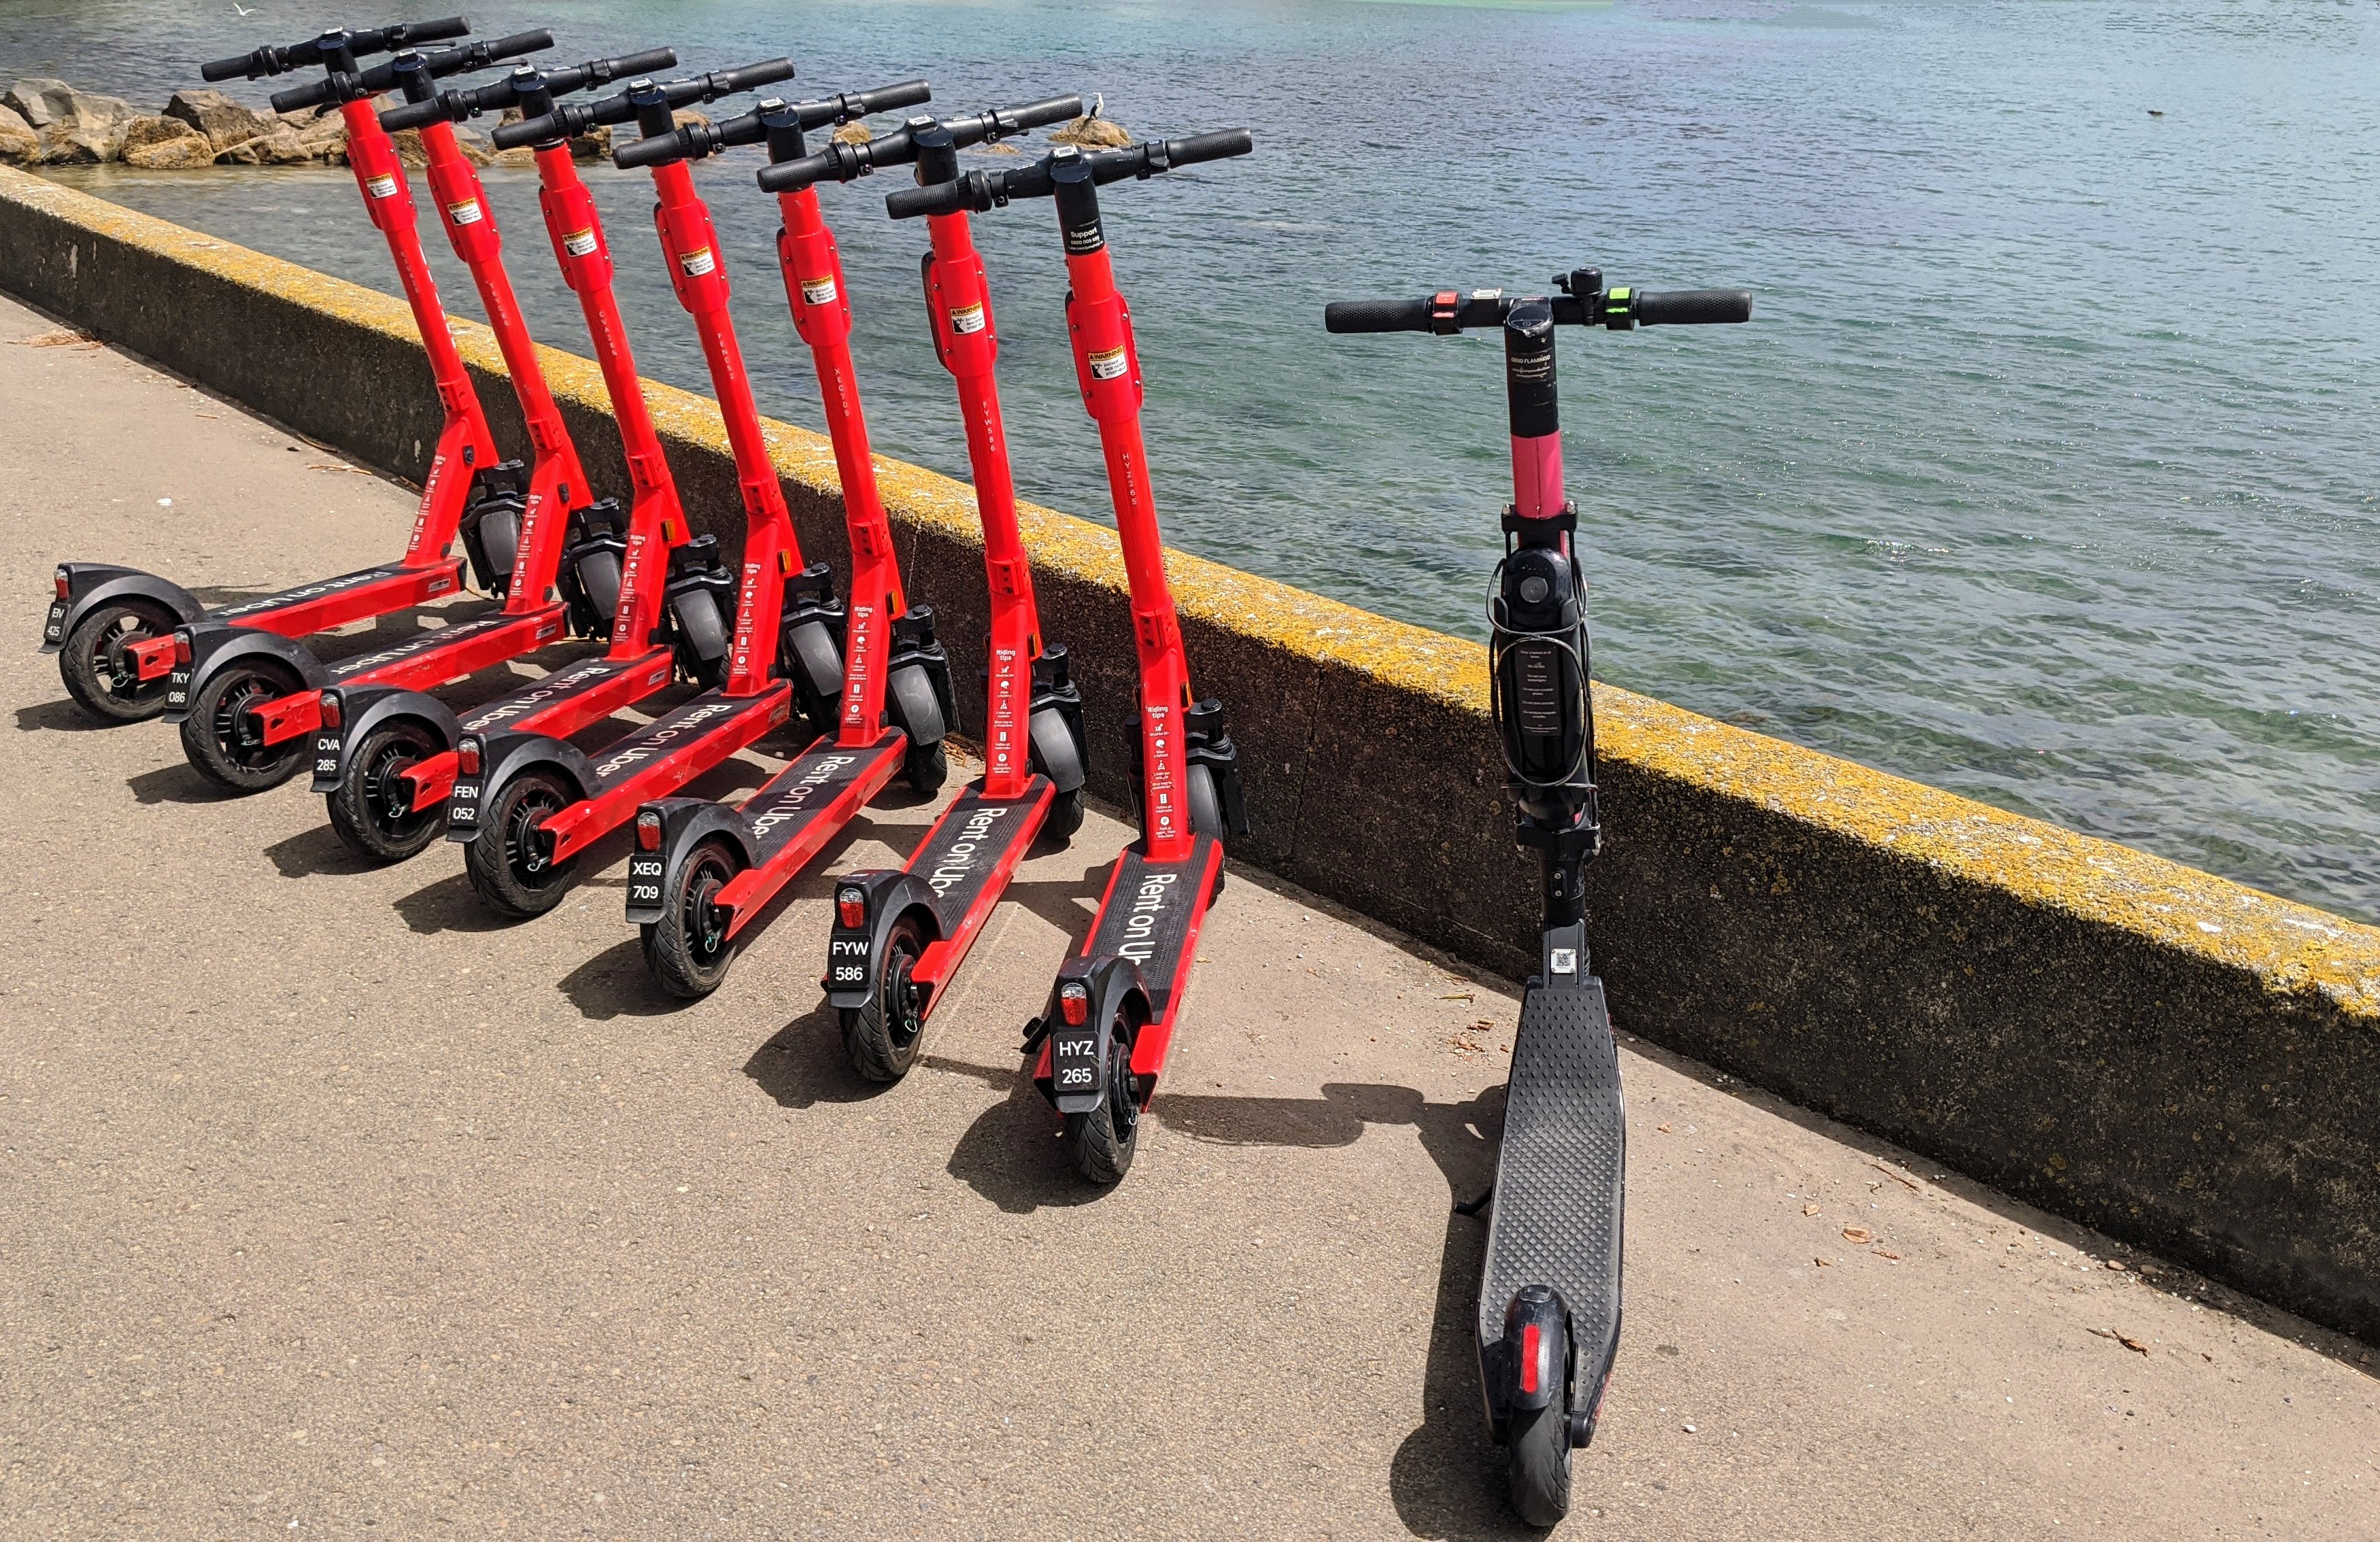 Scooters lined up on Oriental Parade, Wellington